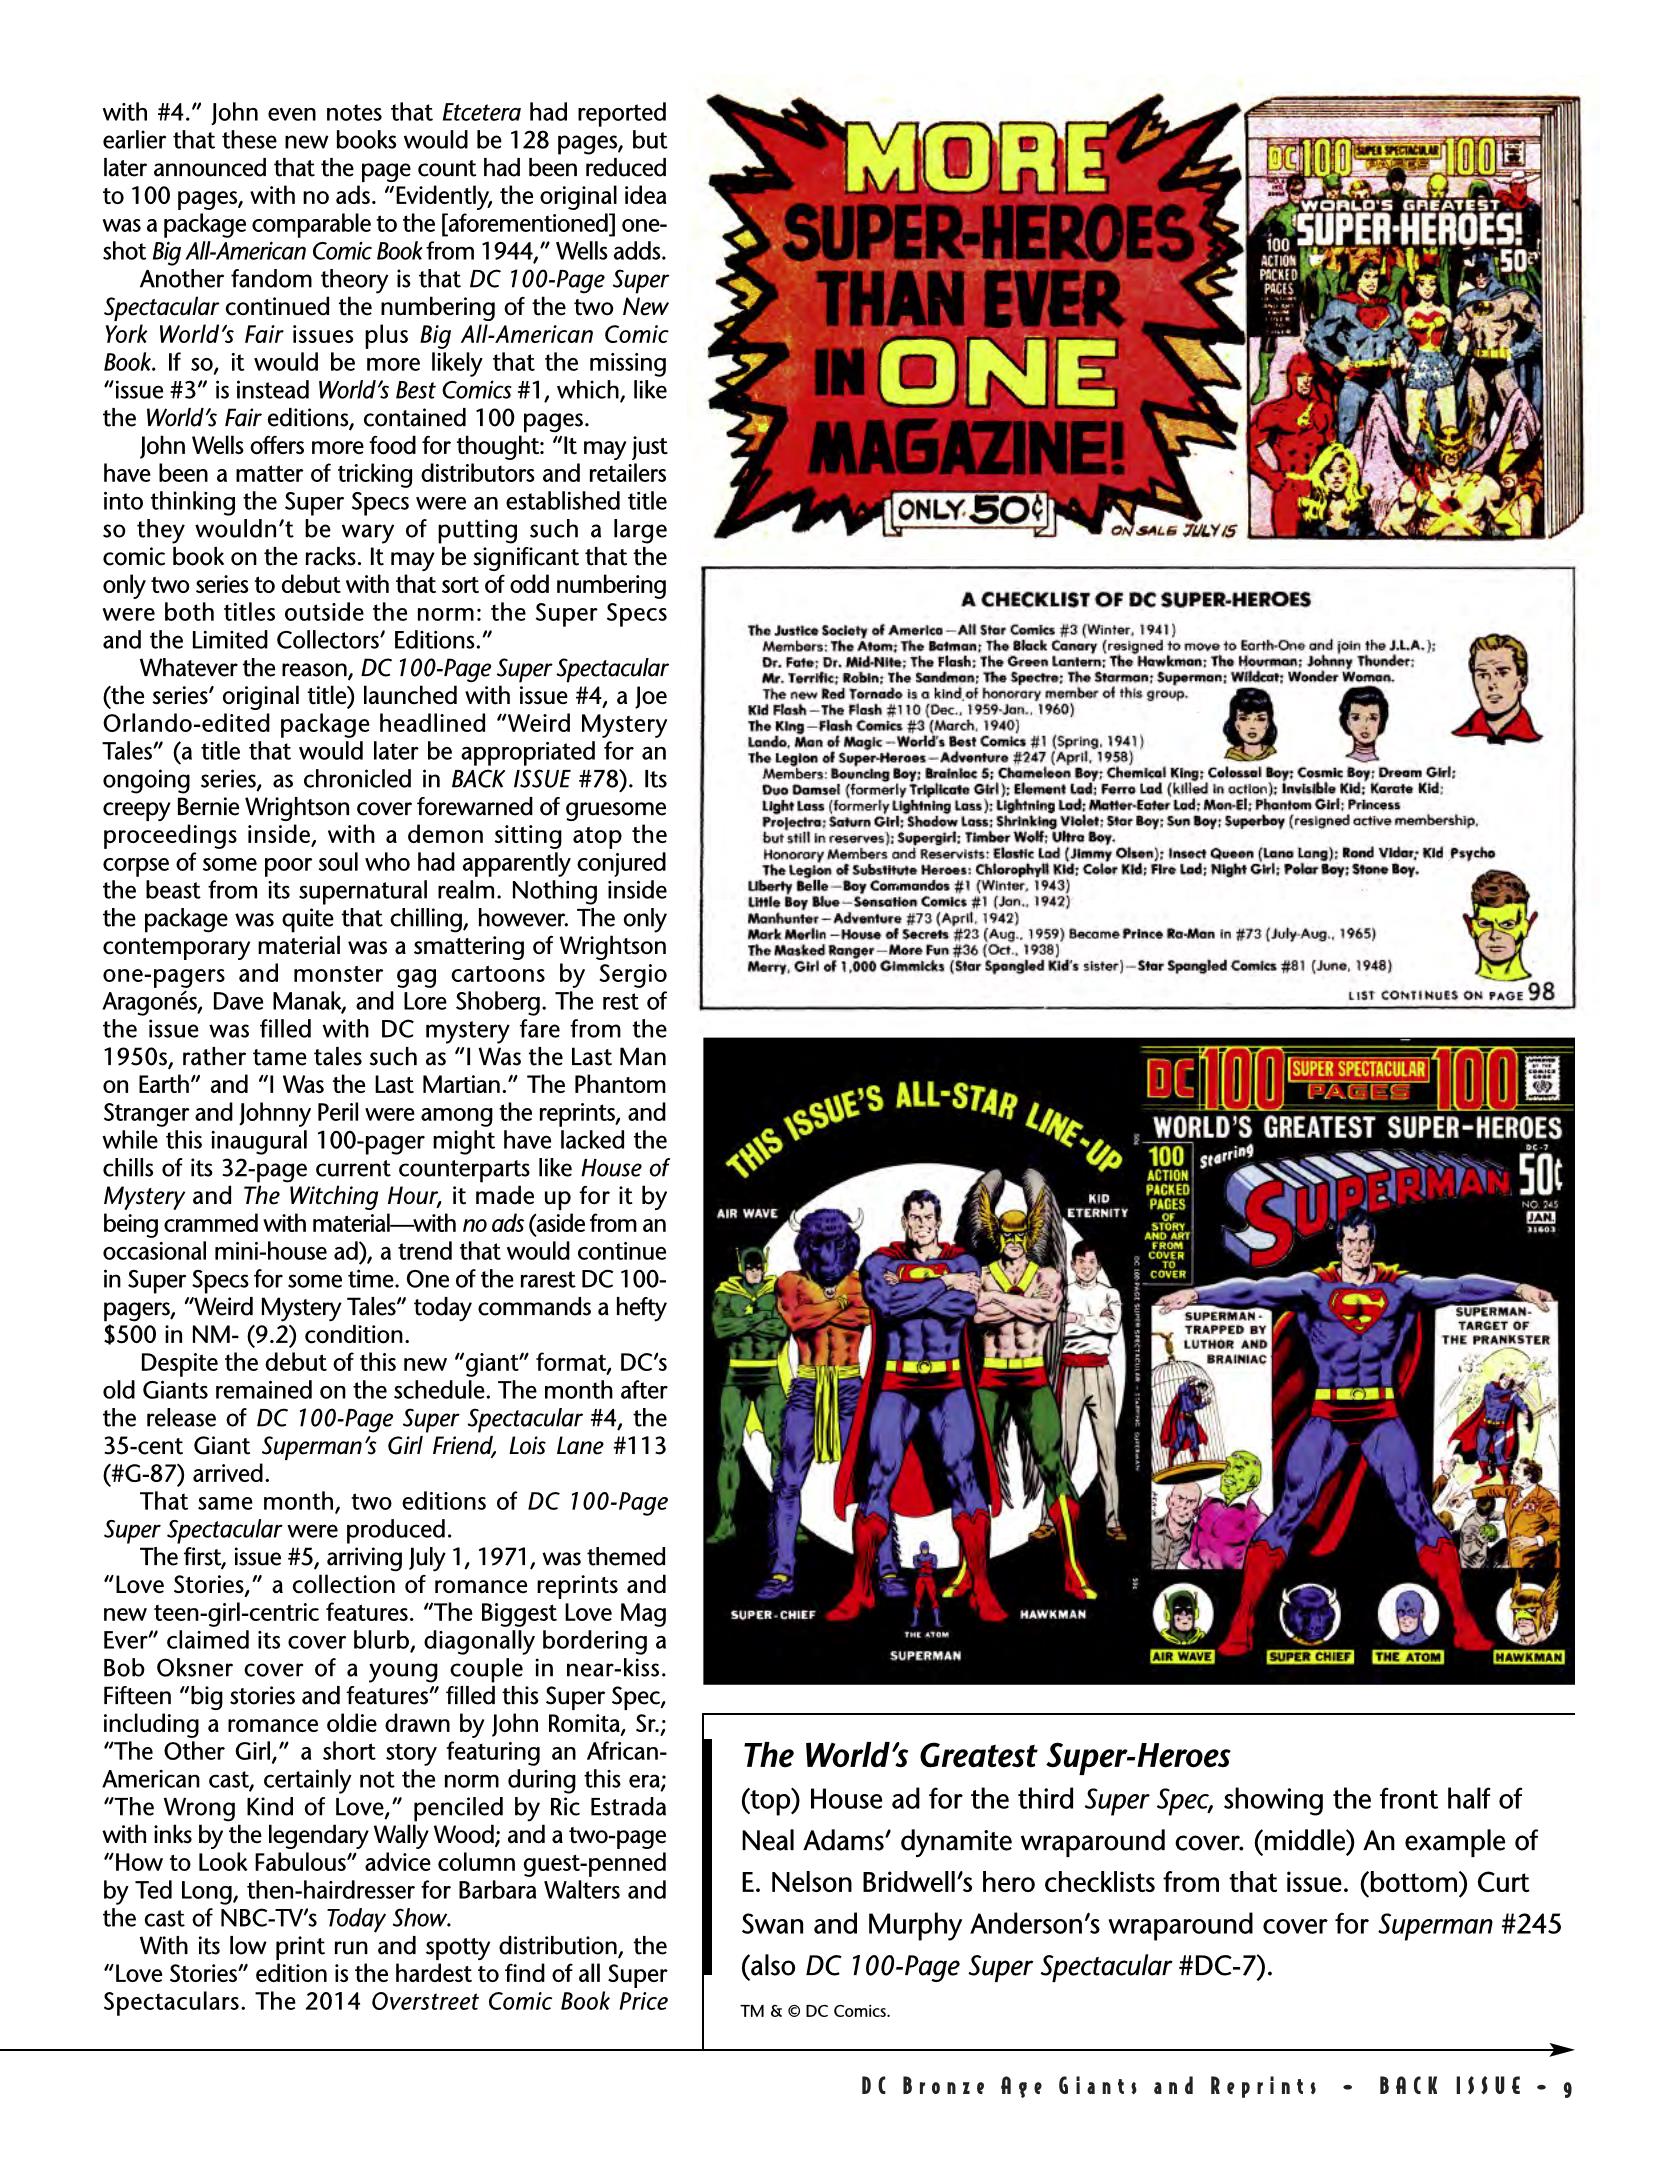 Read online Back Issue comic -  Issue #81 - 13